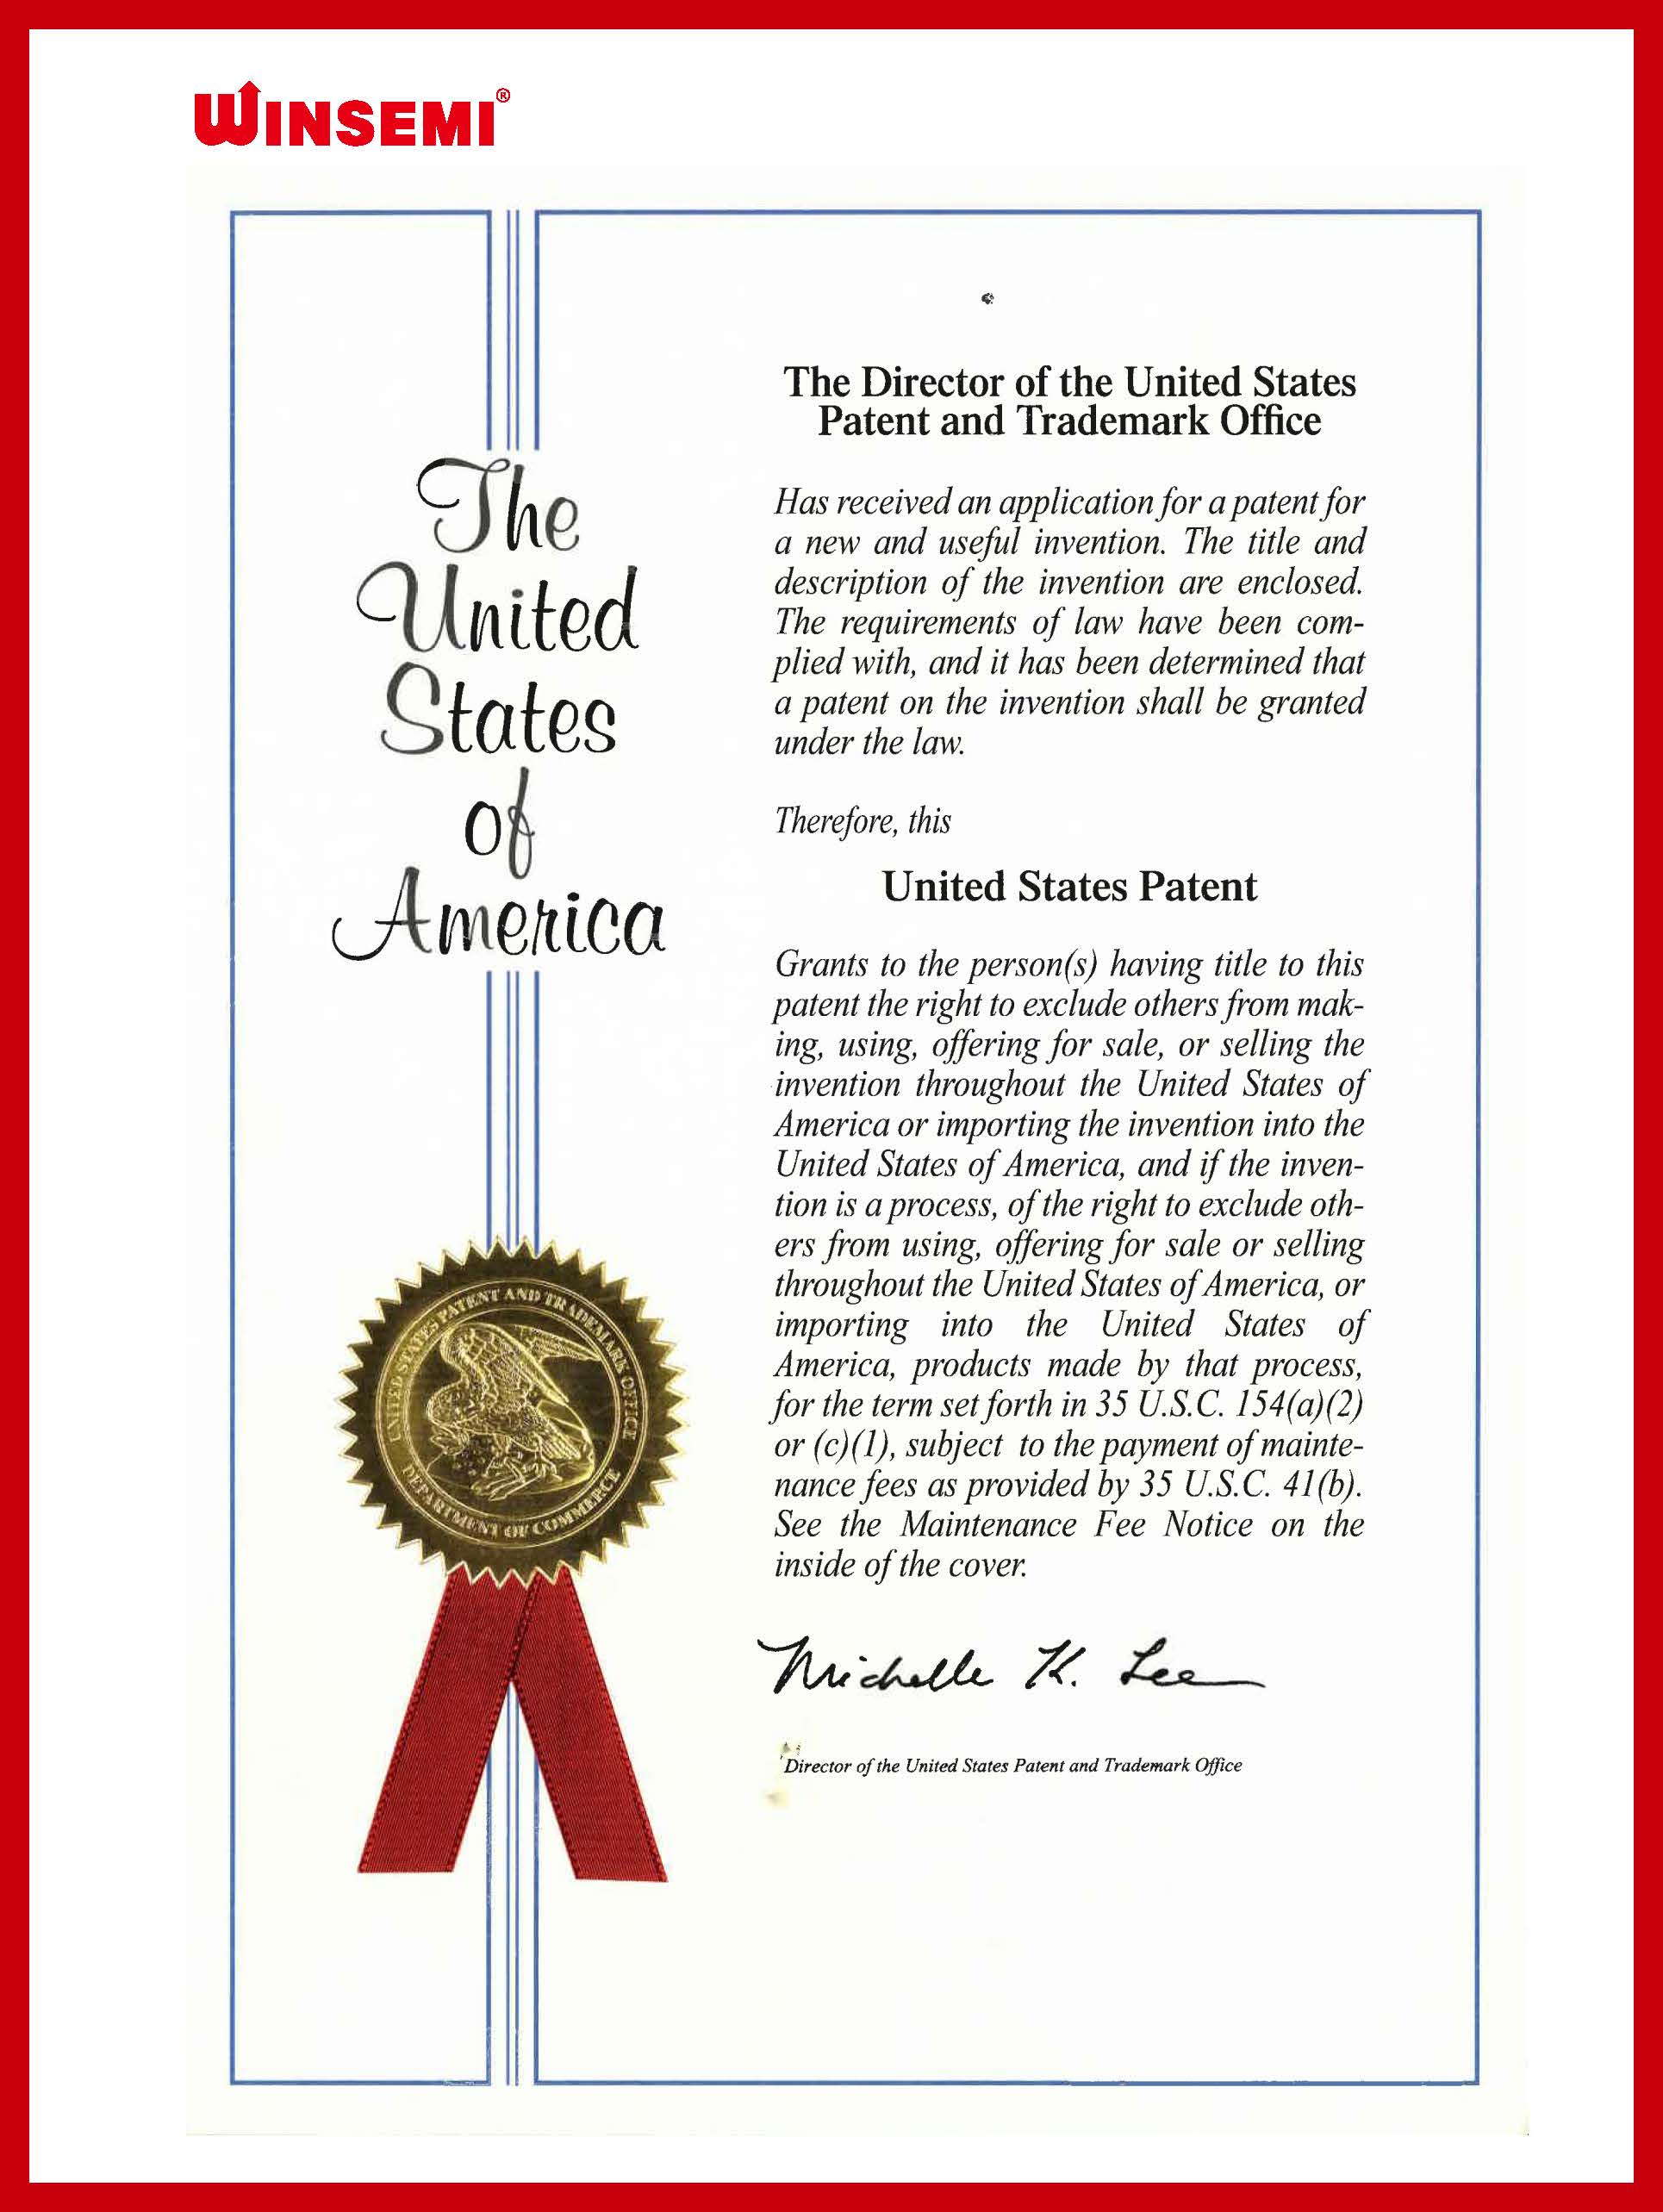 The United States Patent Certificate